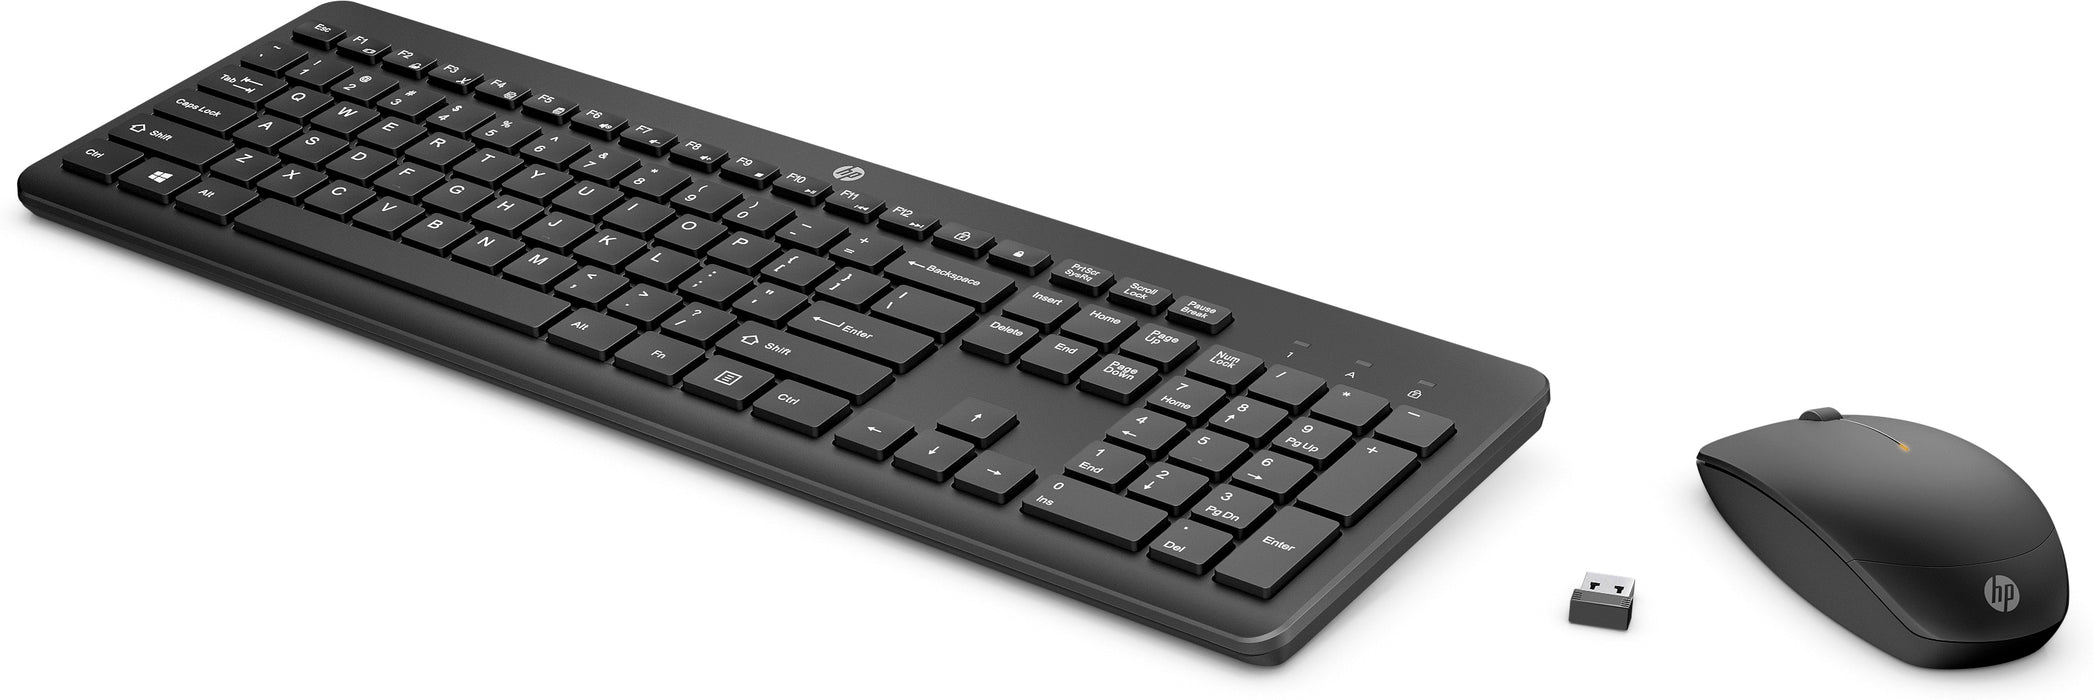 HP 235 Wireless Mouse and Keyboard Combo, Full-size (100%), RF Wireless, Black, Mouse included